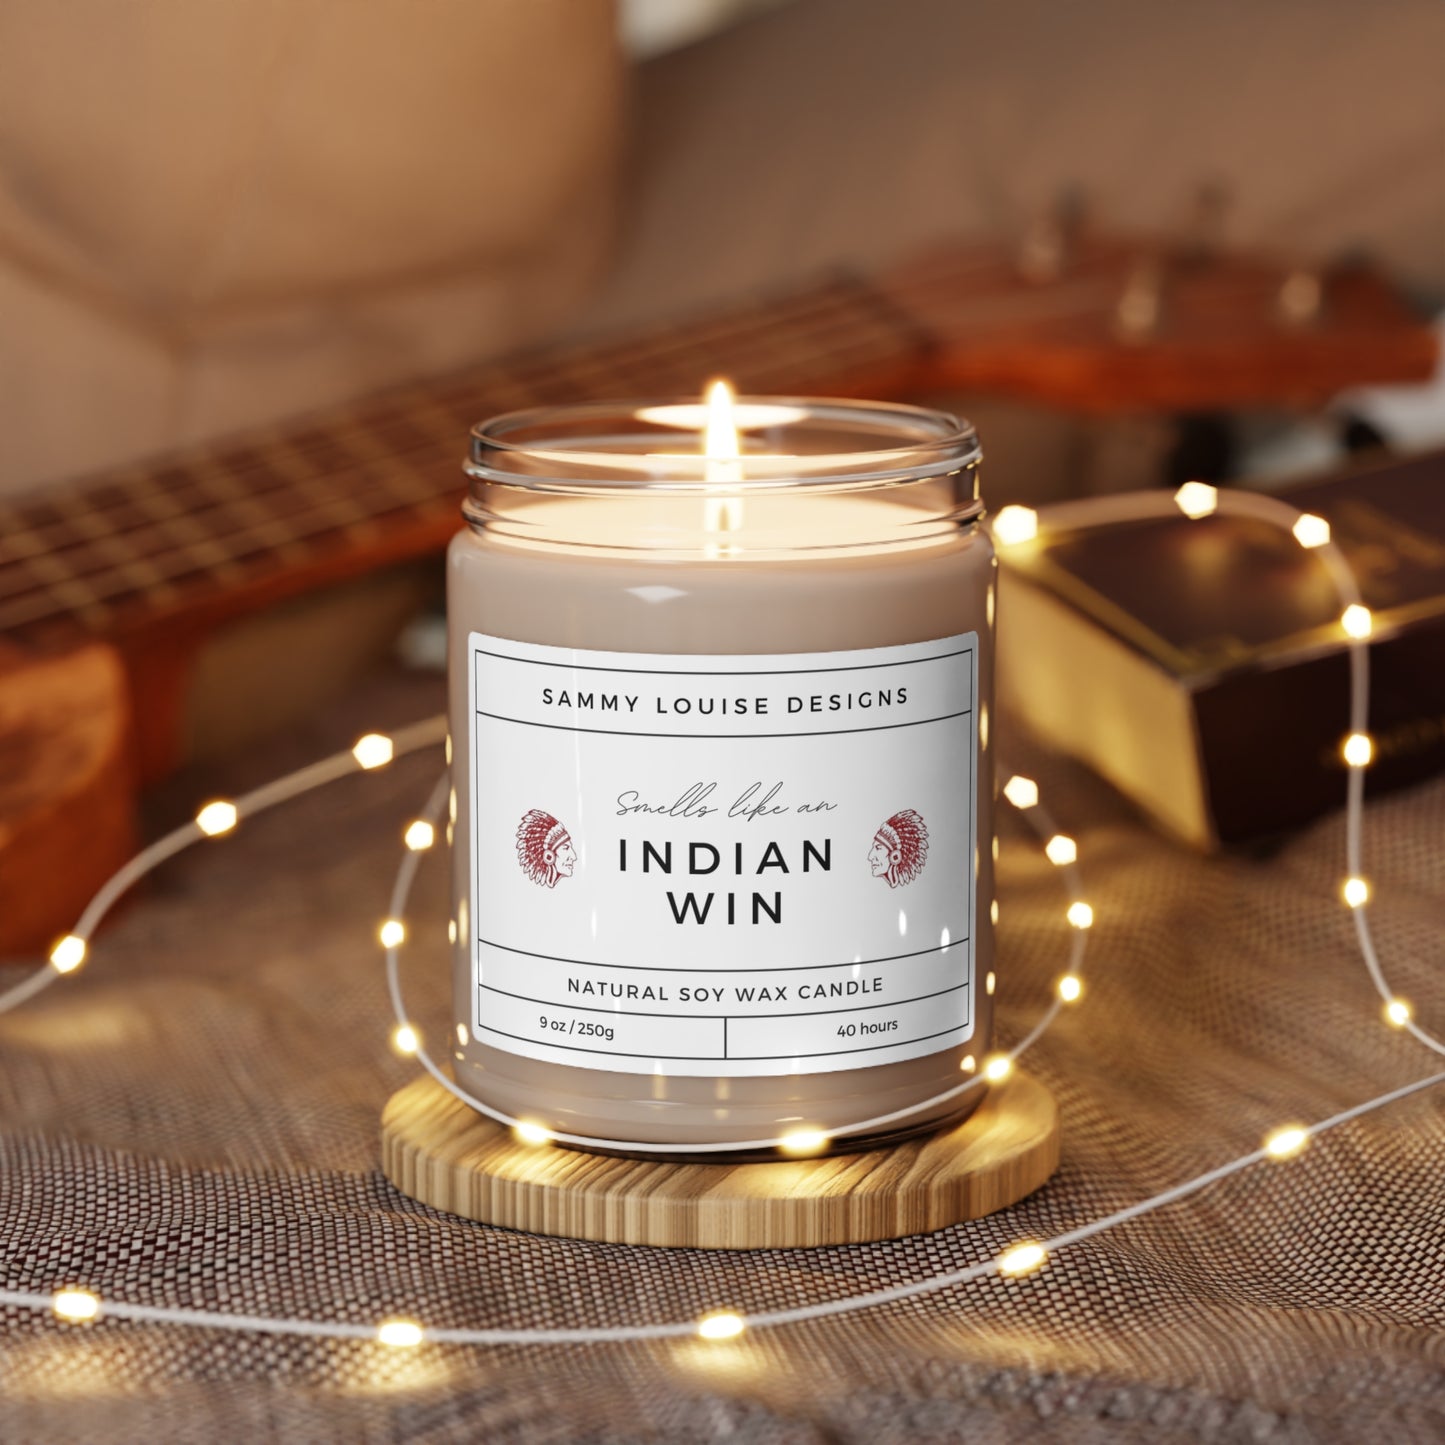 Smells like an Indian Win Scented Soy Candle, 9oz